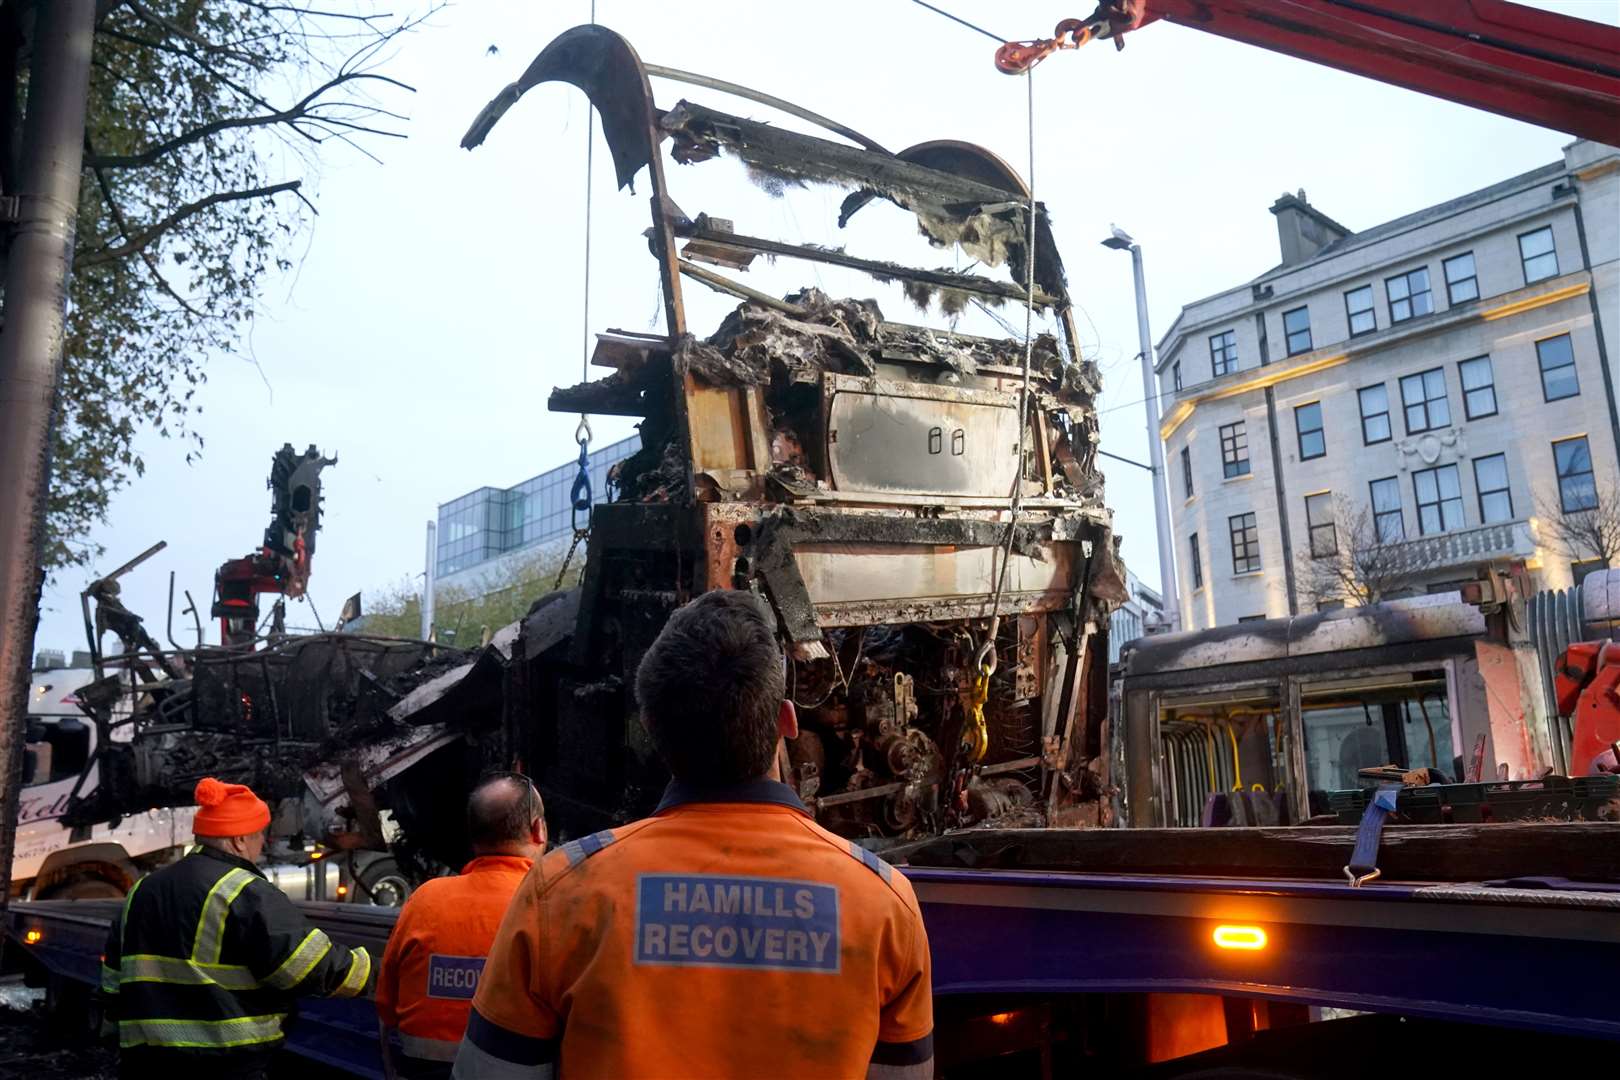 A bus is removed from O’Connell Street in Dublin (Brian Lawless/PA)